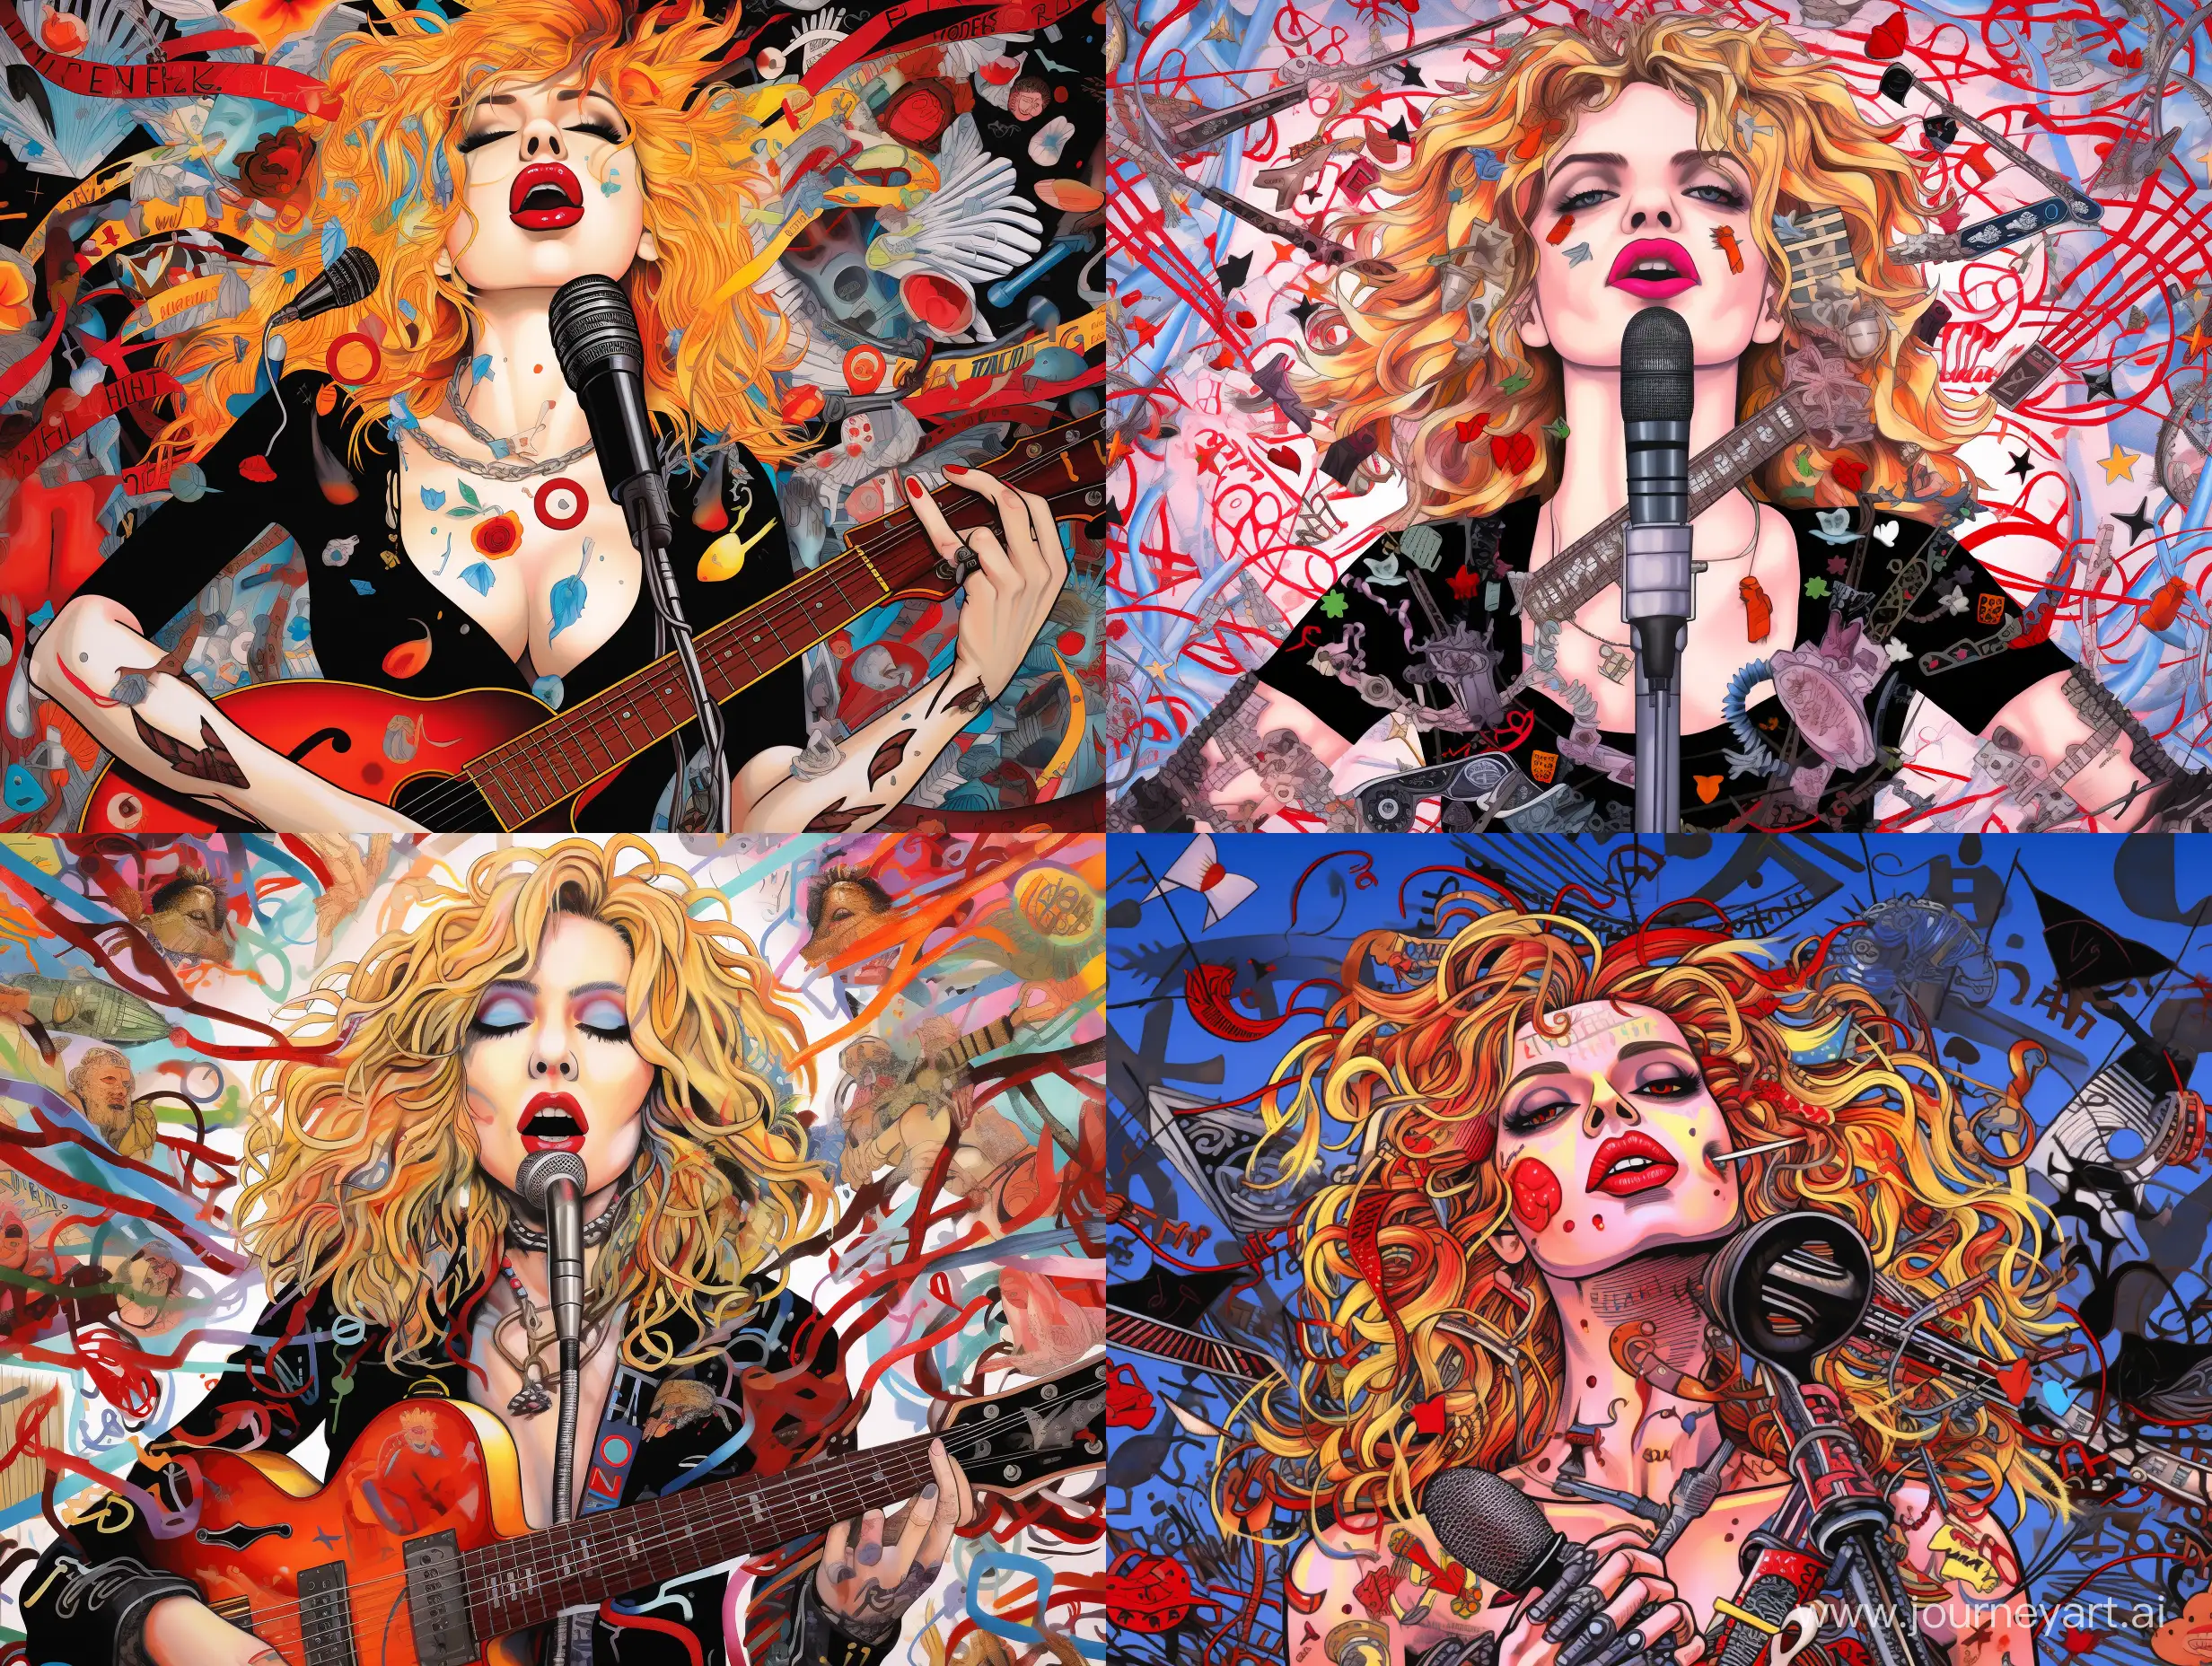 Madonna-in-Vibrant-Pop-Art-Performance-with-Musical-Symbols